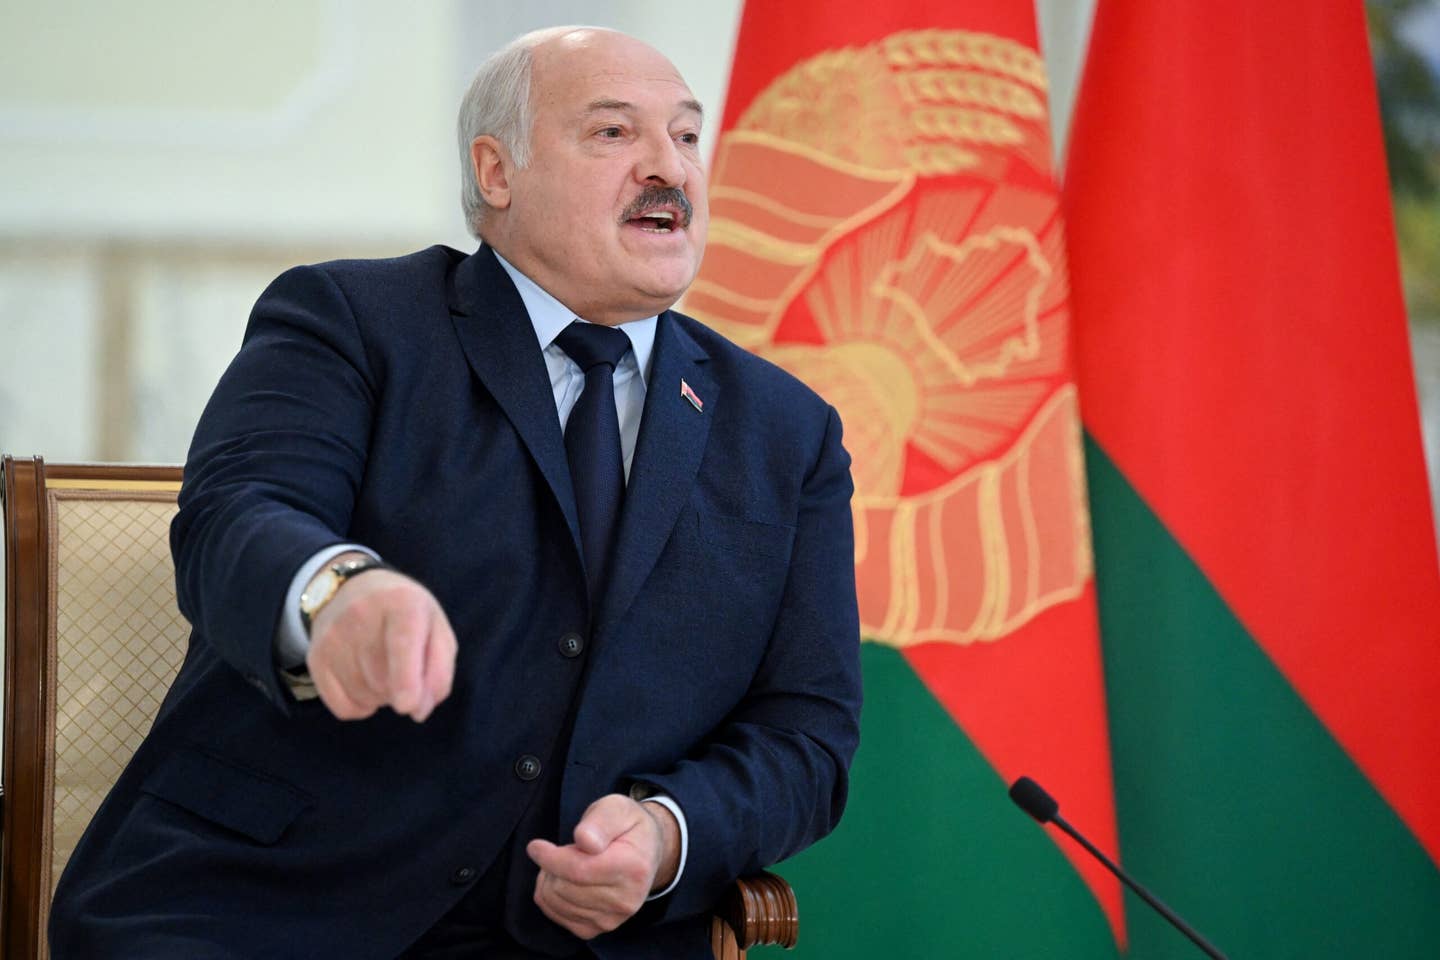 Belarusian President Alexander Lukashenko speaks with foreign media at his residence, the Independence Palace, in the capital Minsk, last month. <em>Photo by NATALIA KOLESNIKOVA/AFP via Getty Images</em>